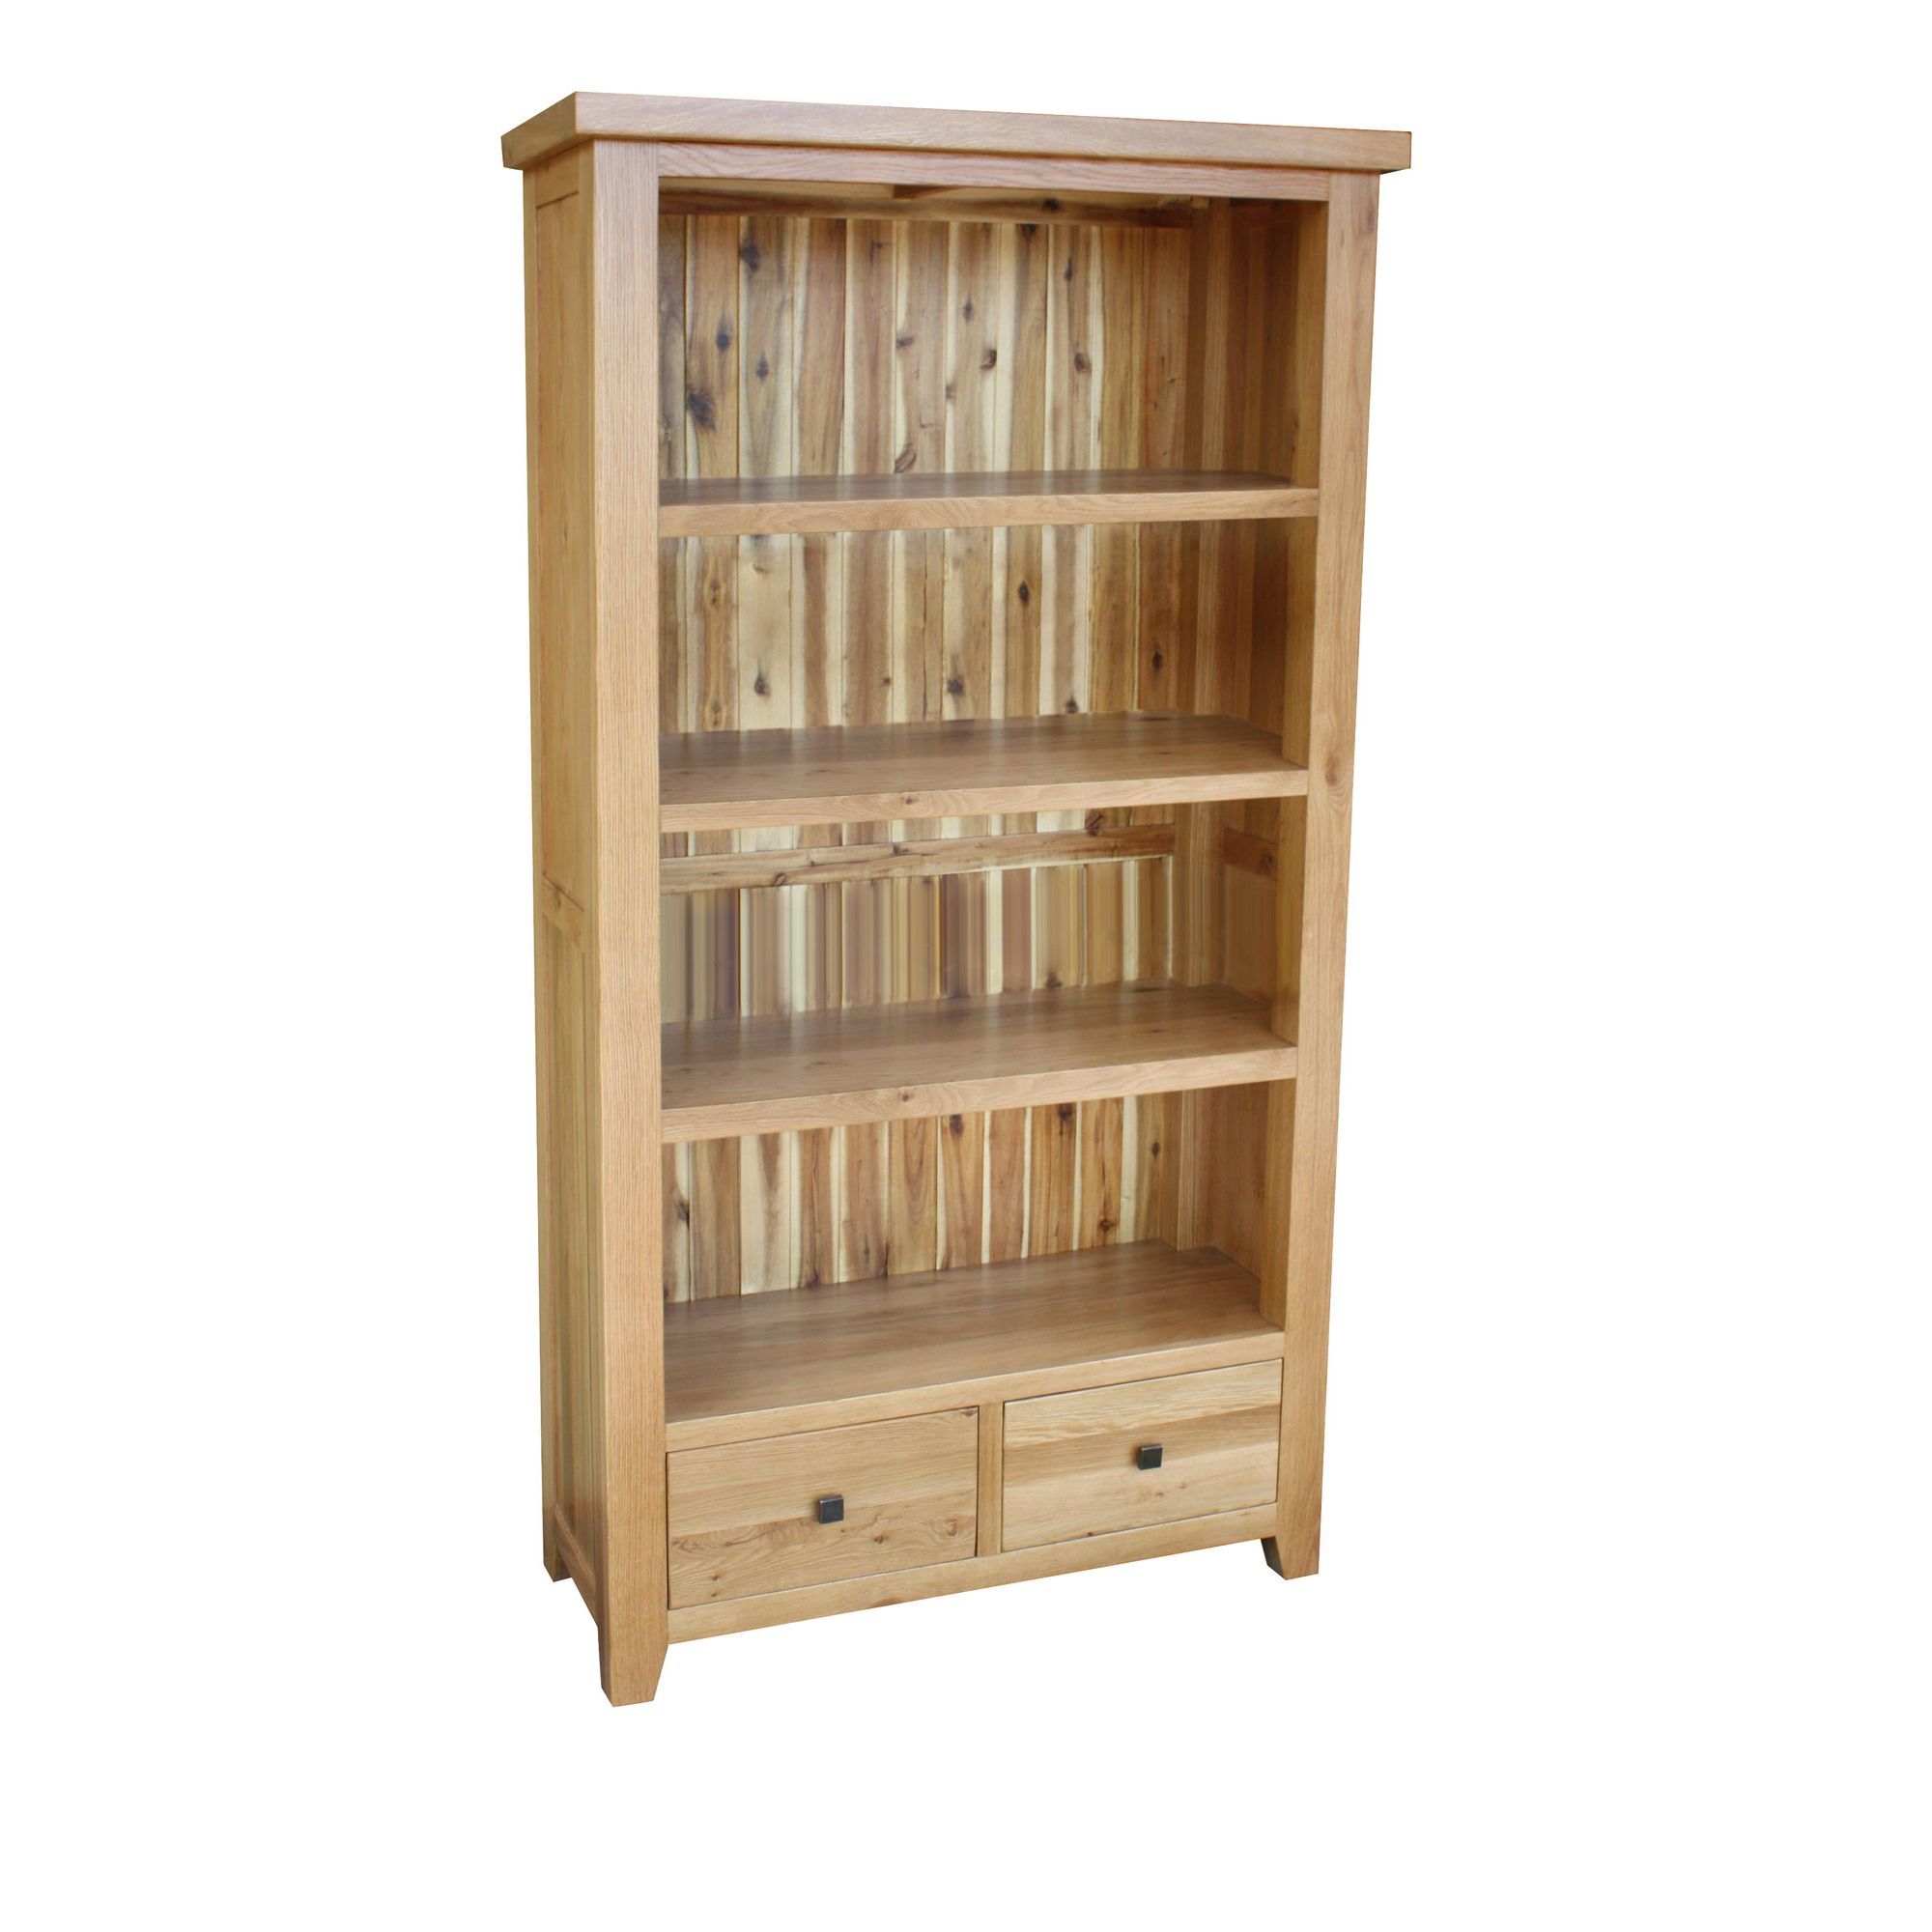 Thorndon Taunton Bookcase in Rustic at Tescos Direct